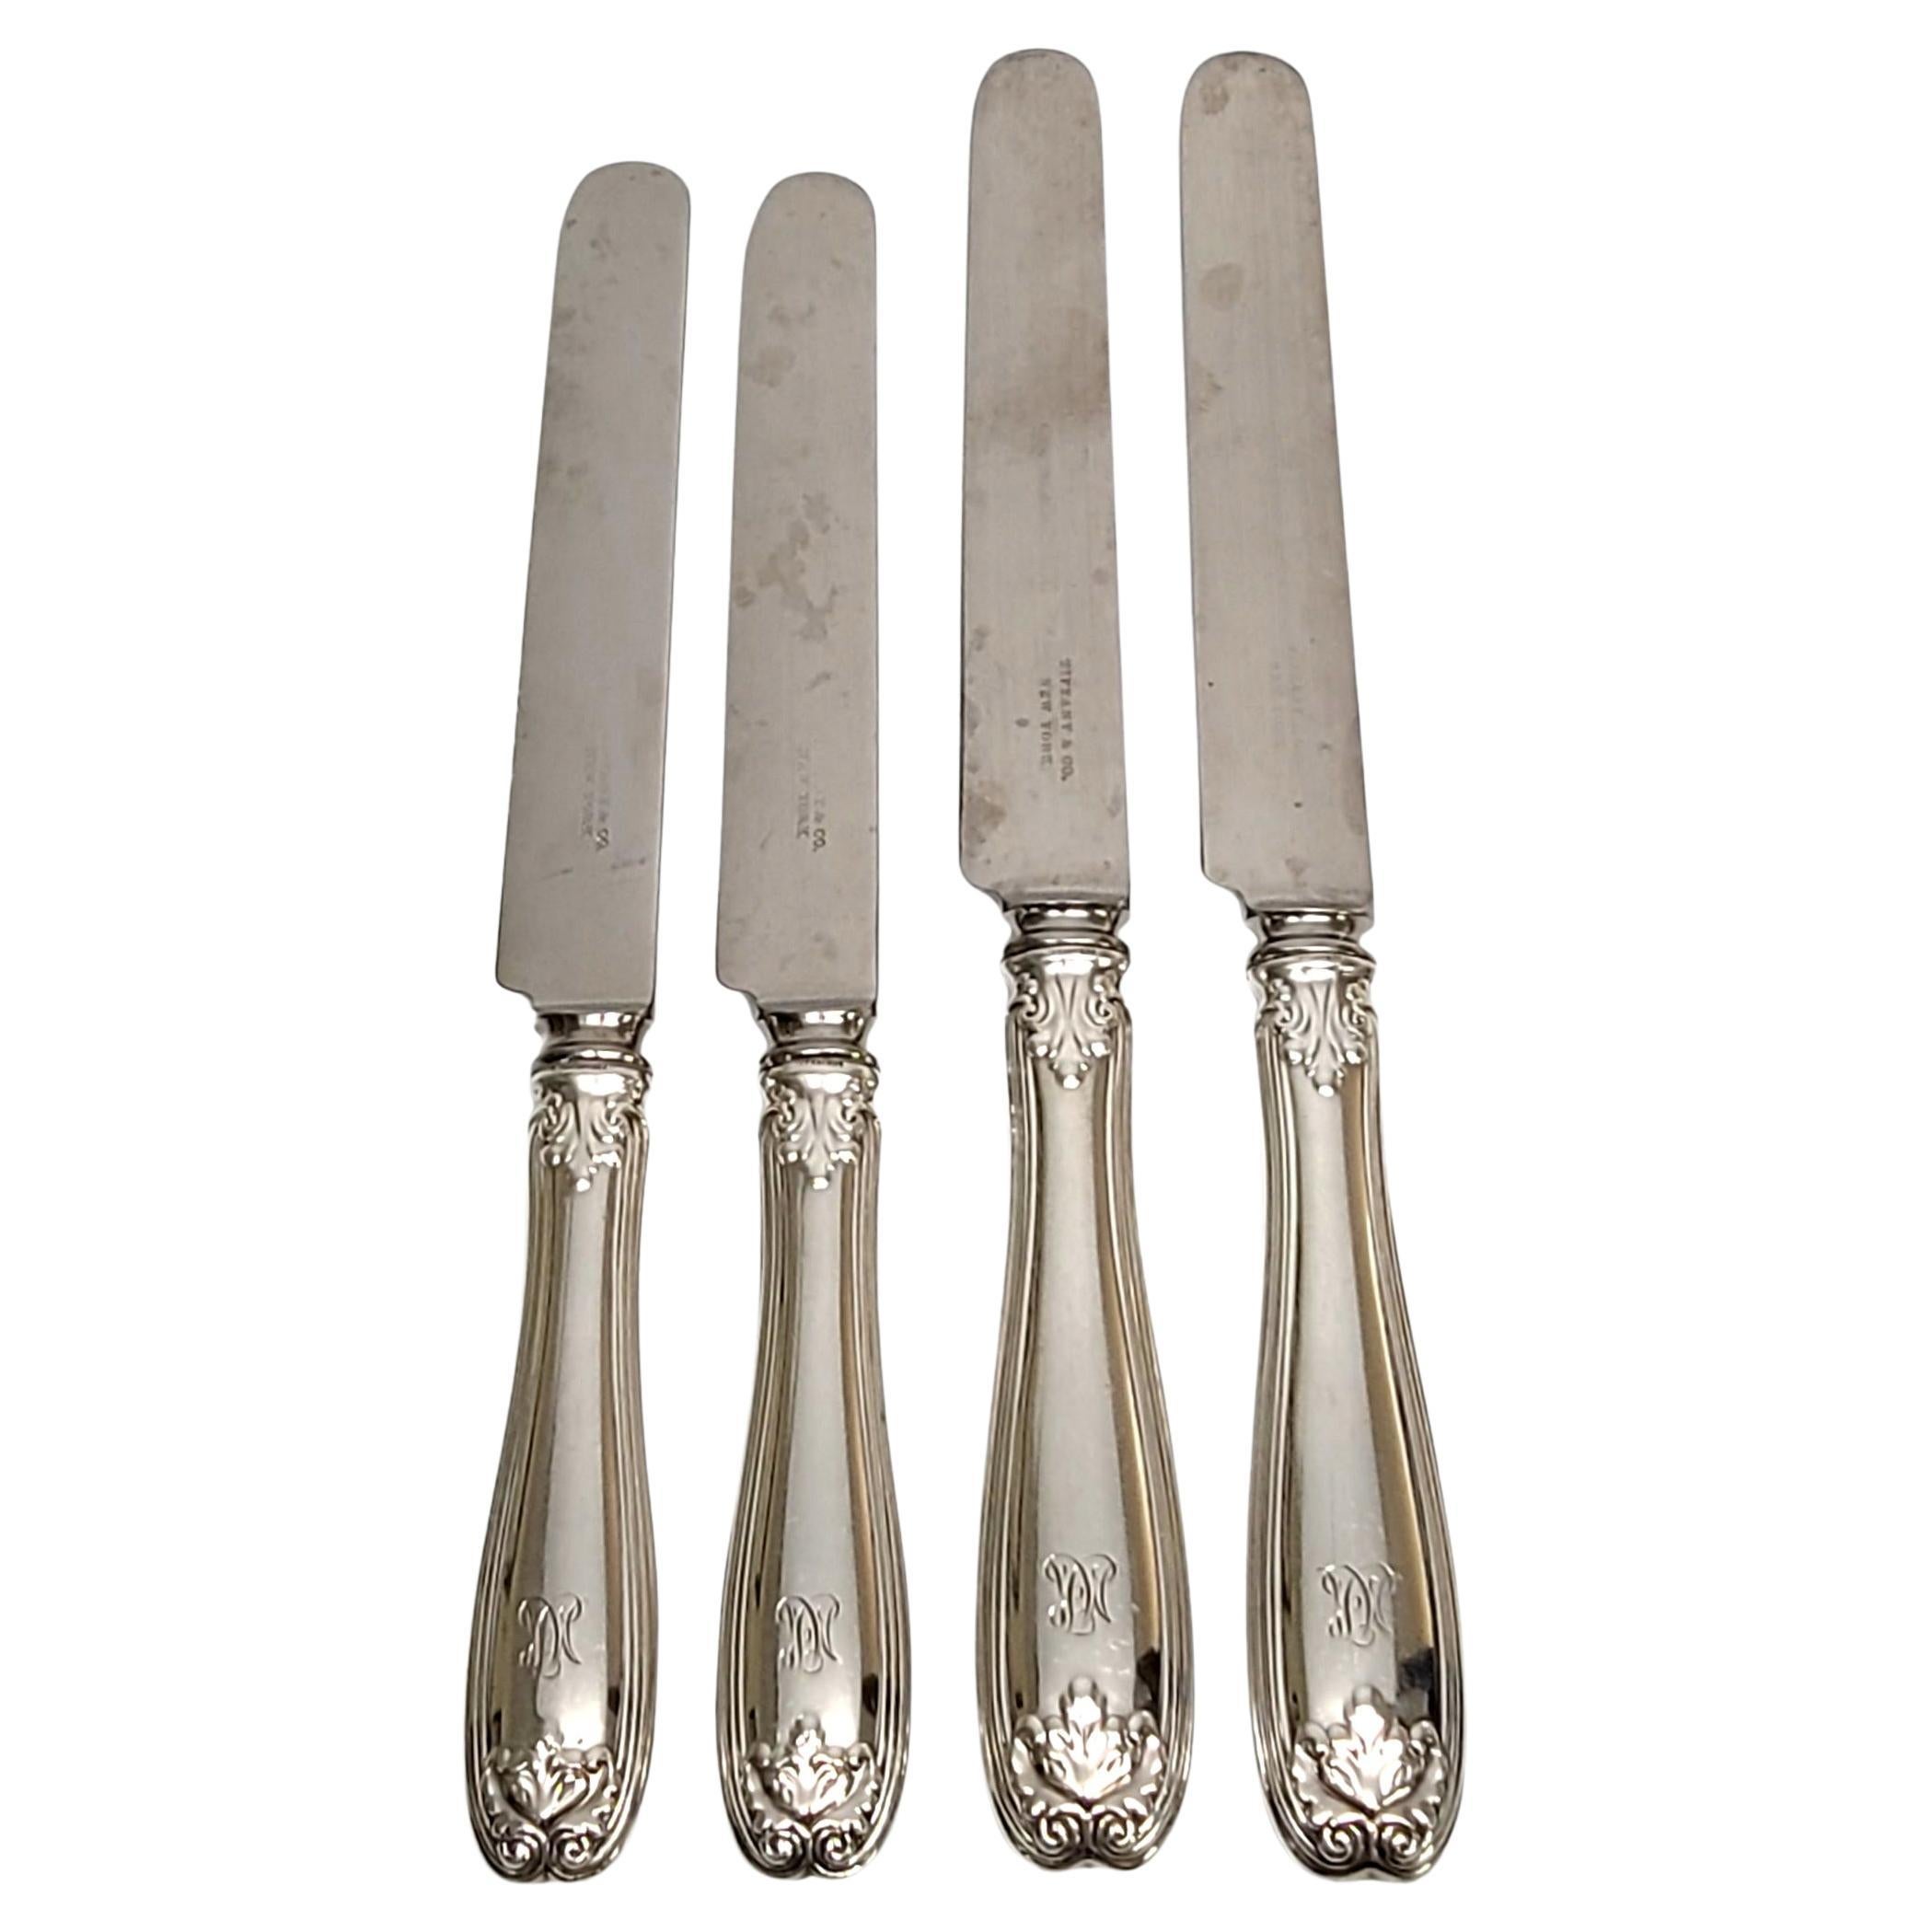 Set of 4 Tiffany & Co Sterling Silver Colonial Knives with Monogram